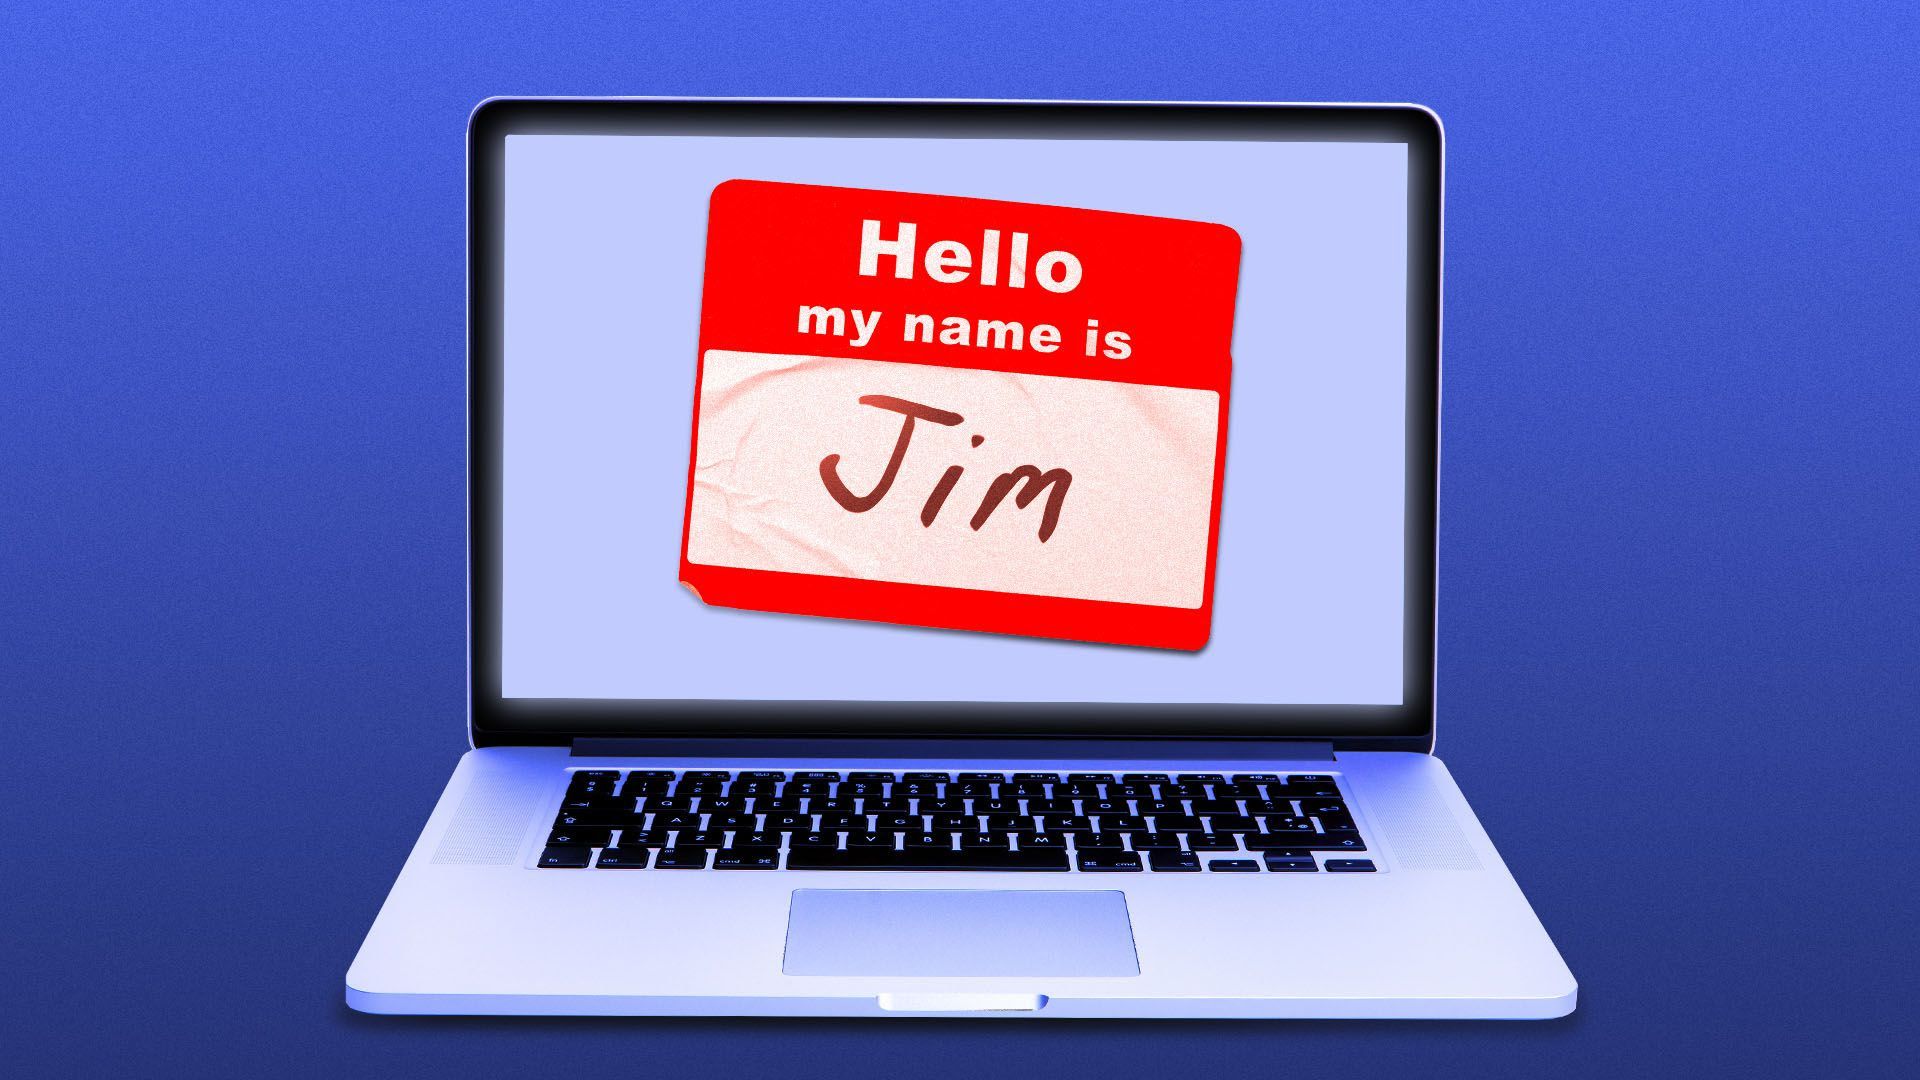 Illustration of a laptop with a sticker that says "Hello, my name is Jim."